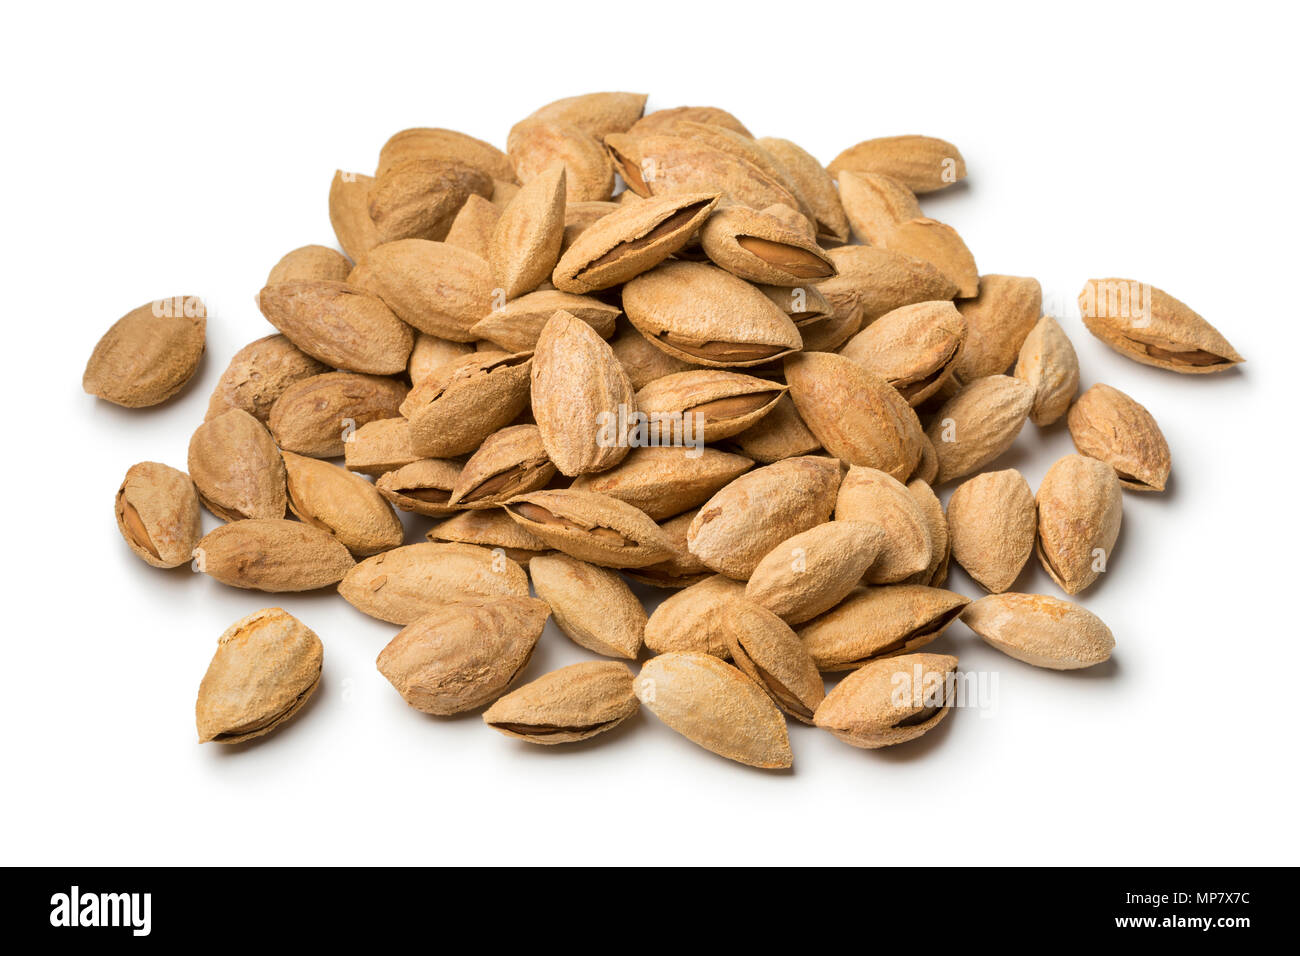 Heap of fresh unpeeled almonds isolated on white background Stock Photo